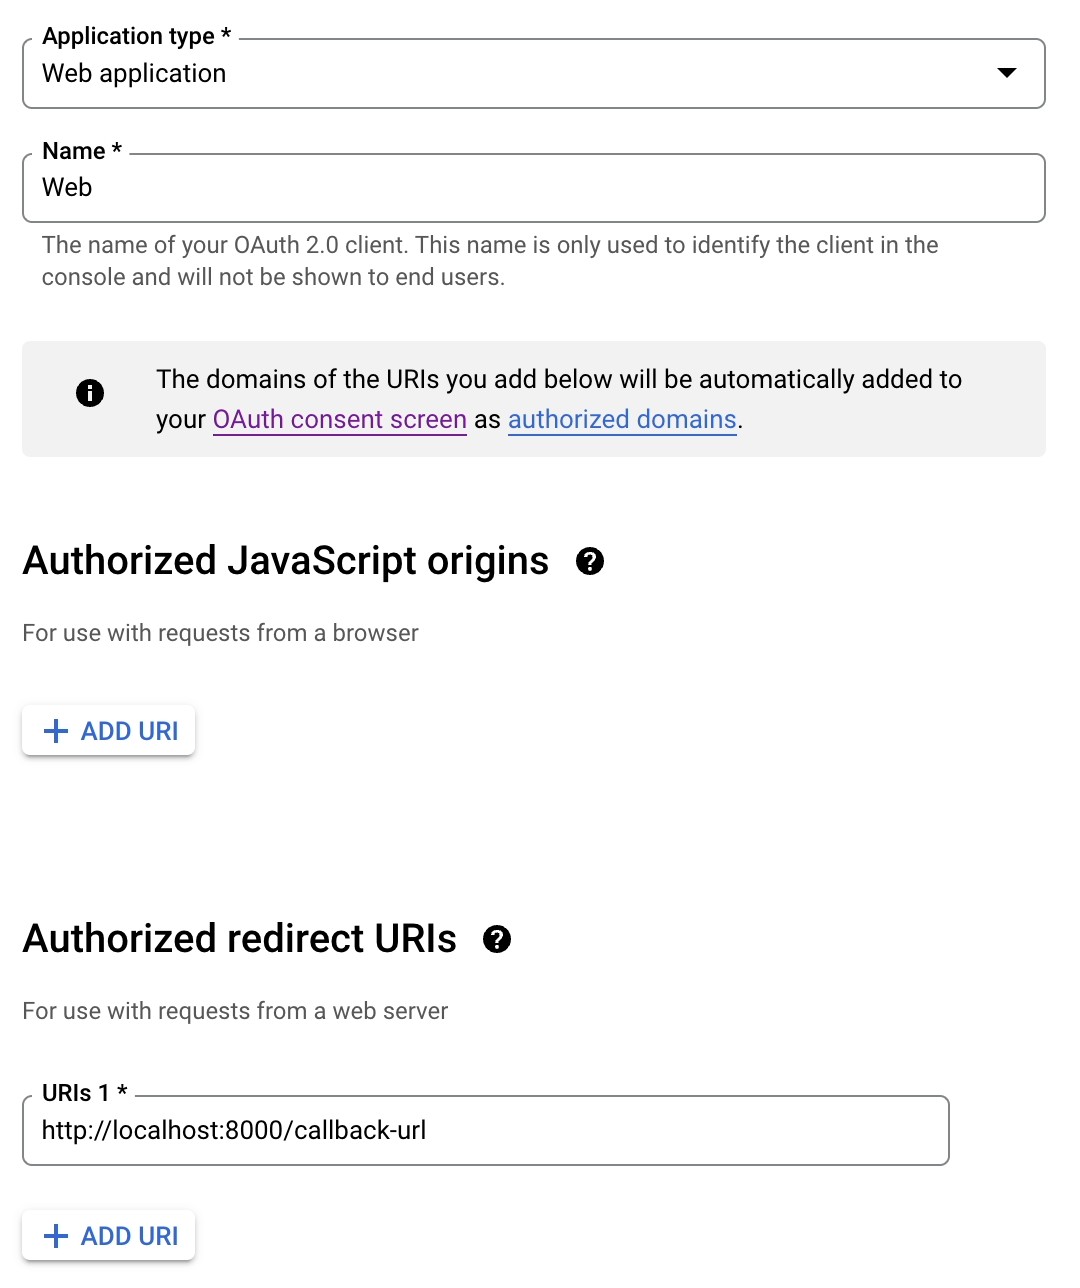 Setting an applications type, name, and authorized redirect URIs in Google Cloud